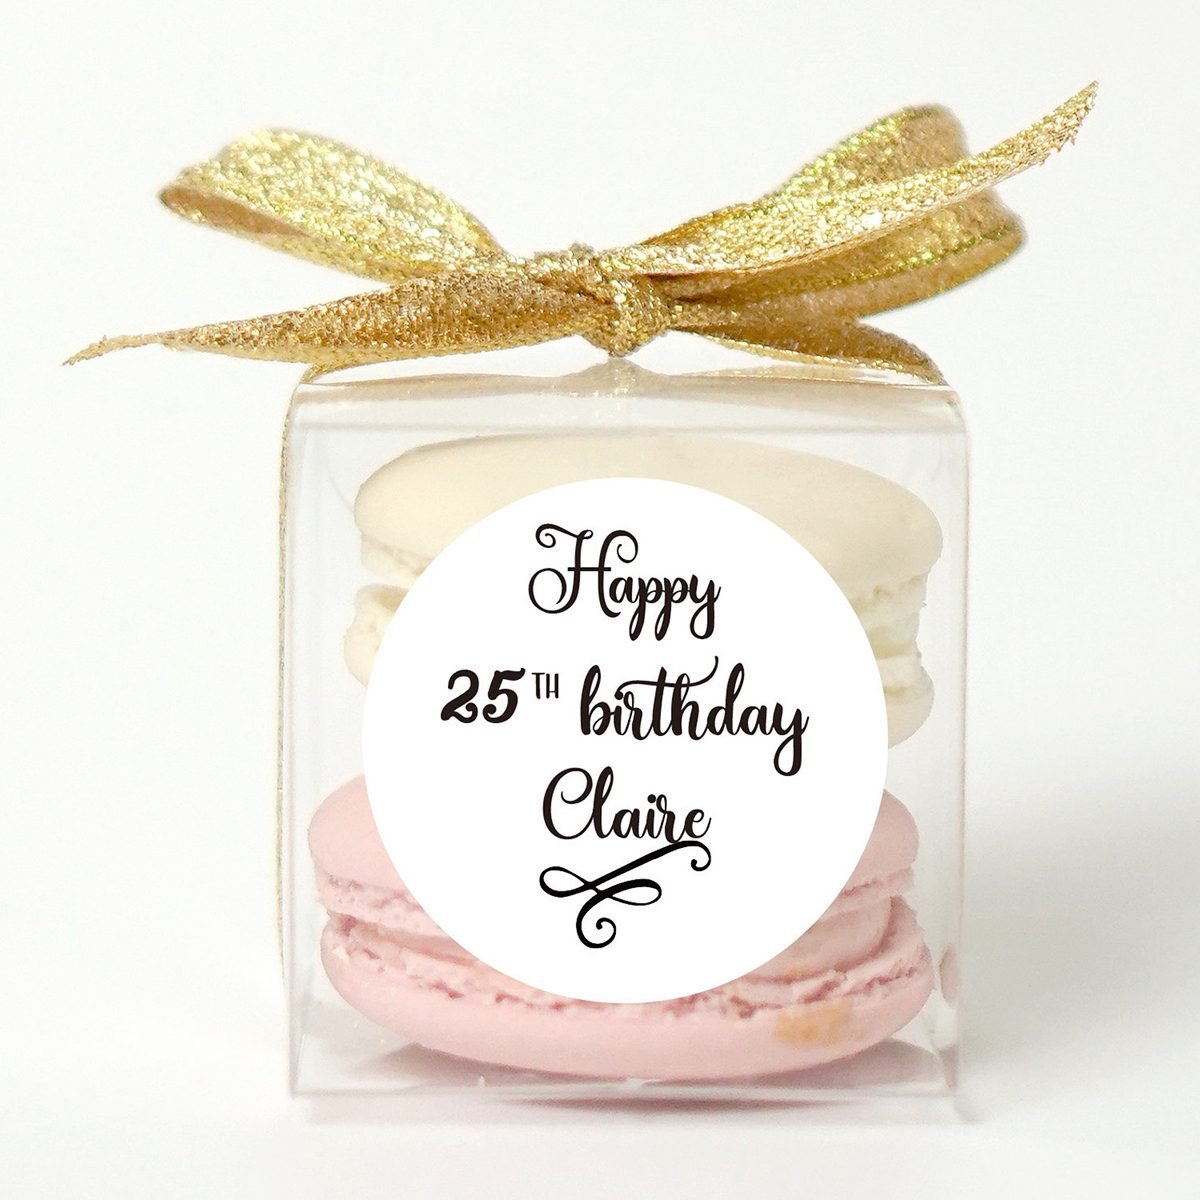 Personalized Party Favors For Your Next Event